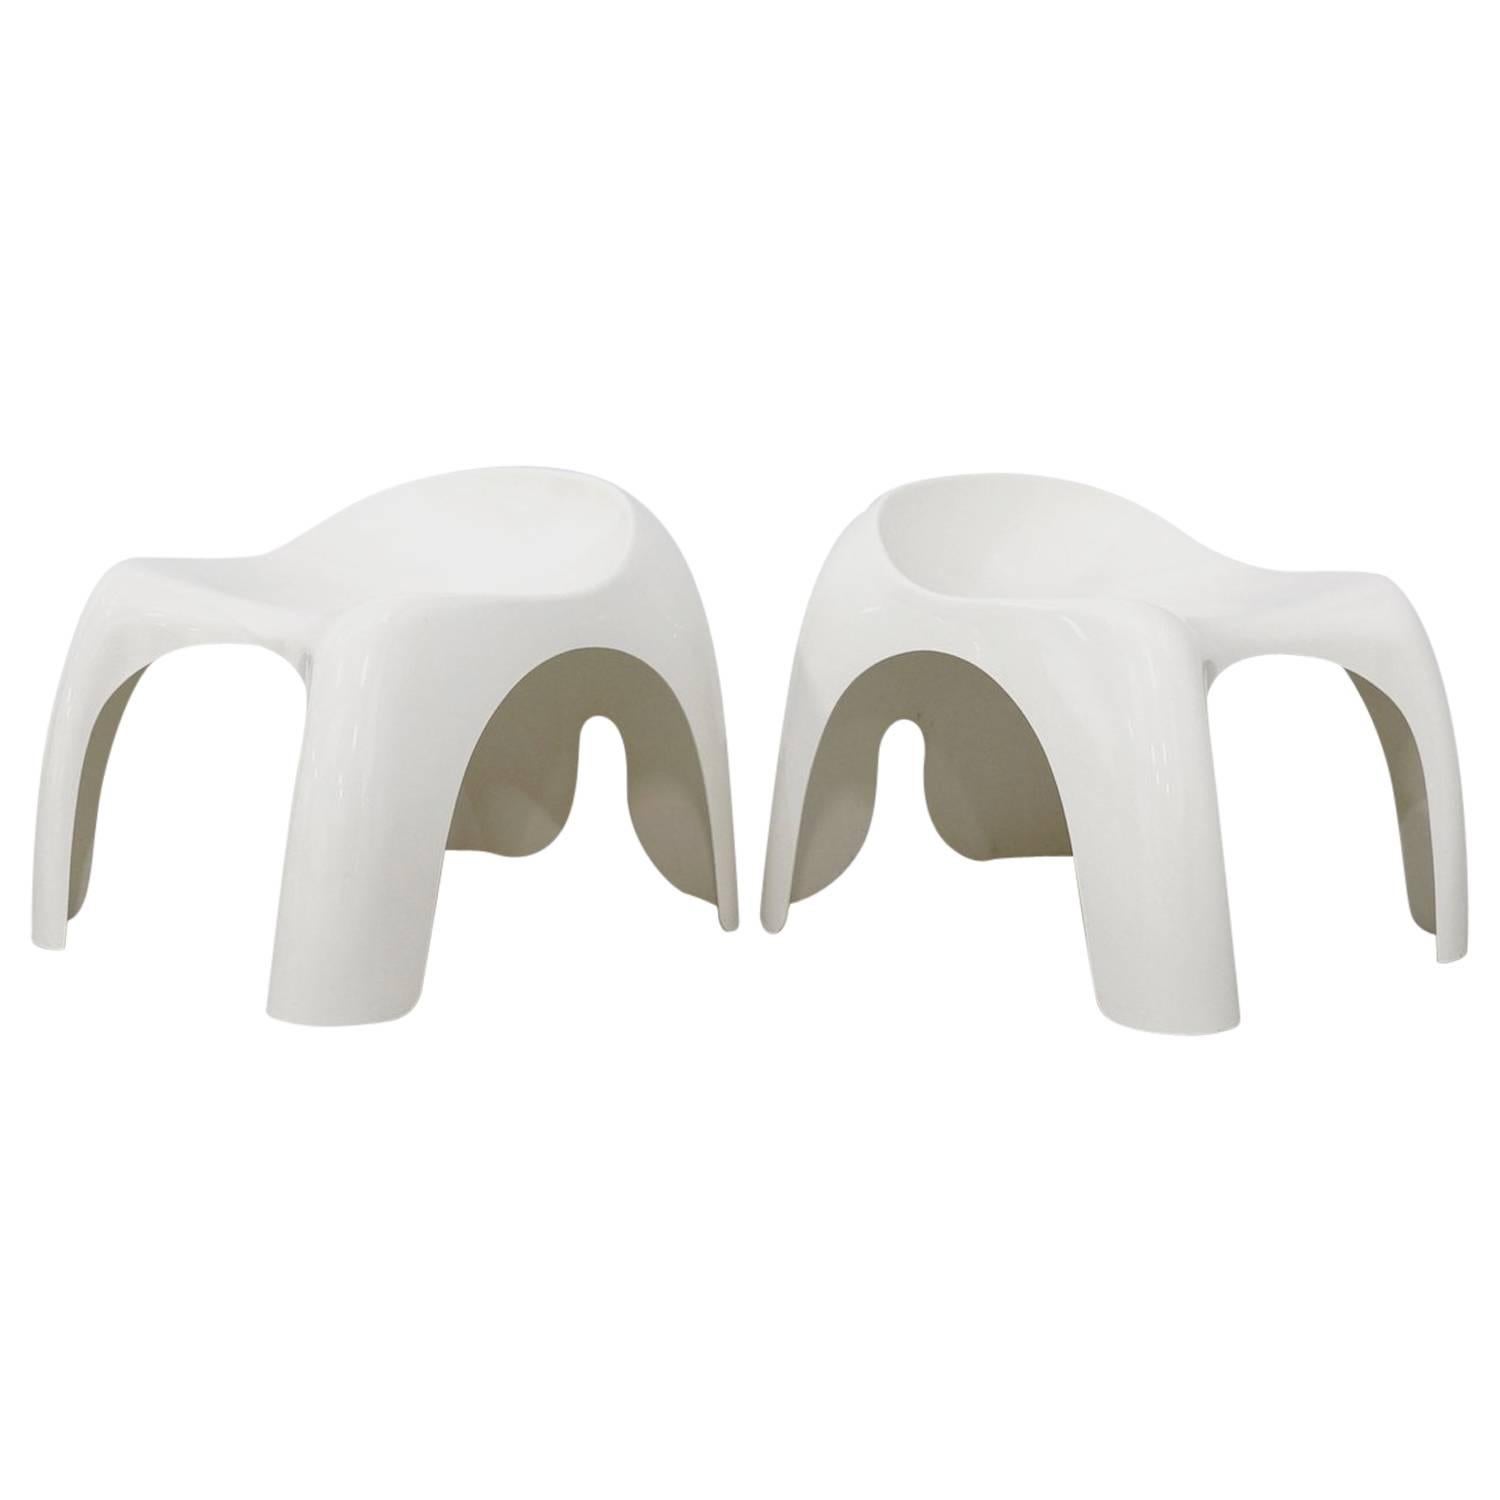 Set of Two Efebo Stackable Stools White ABS, Design by Stacy Dukes, 1960 For Sale